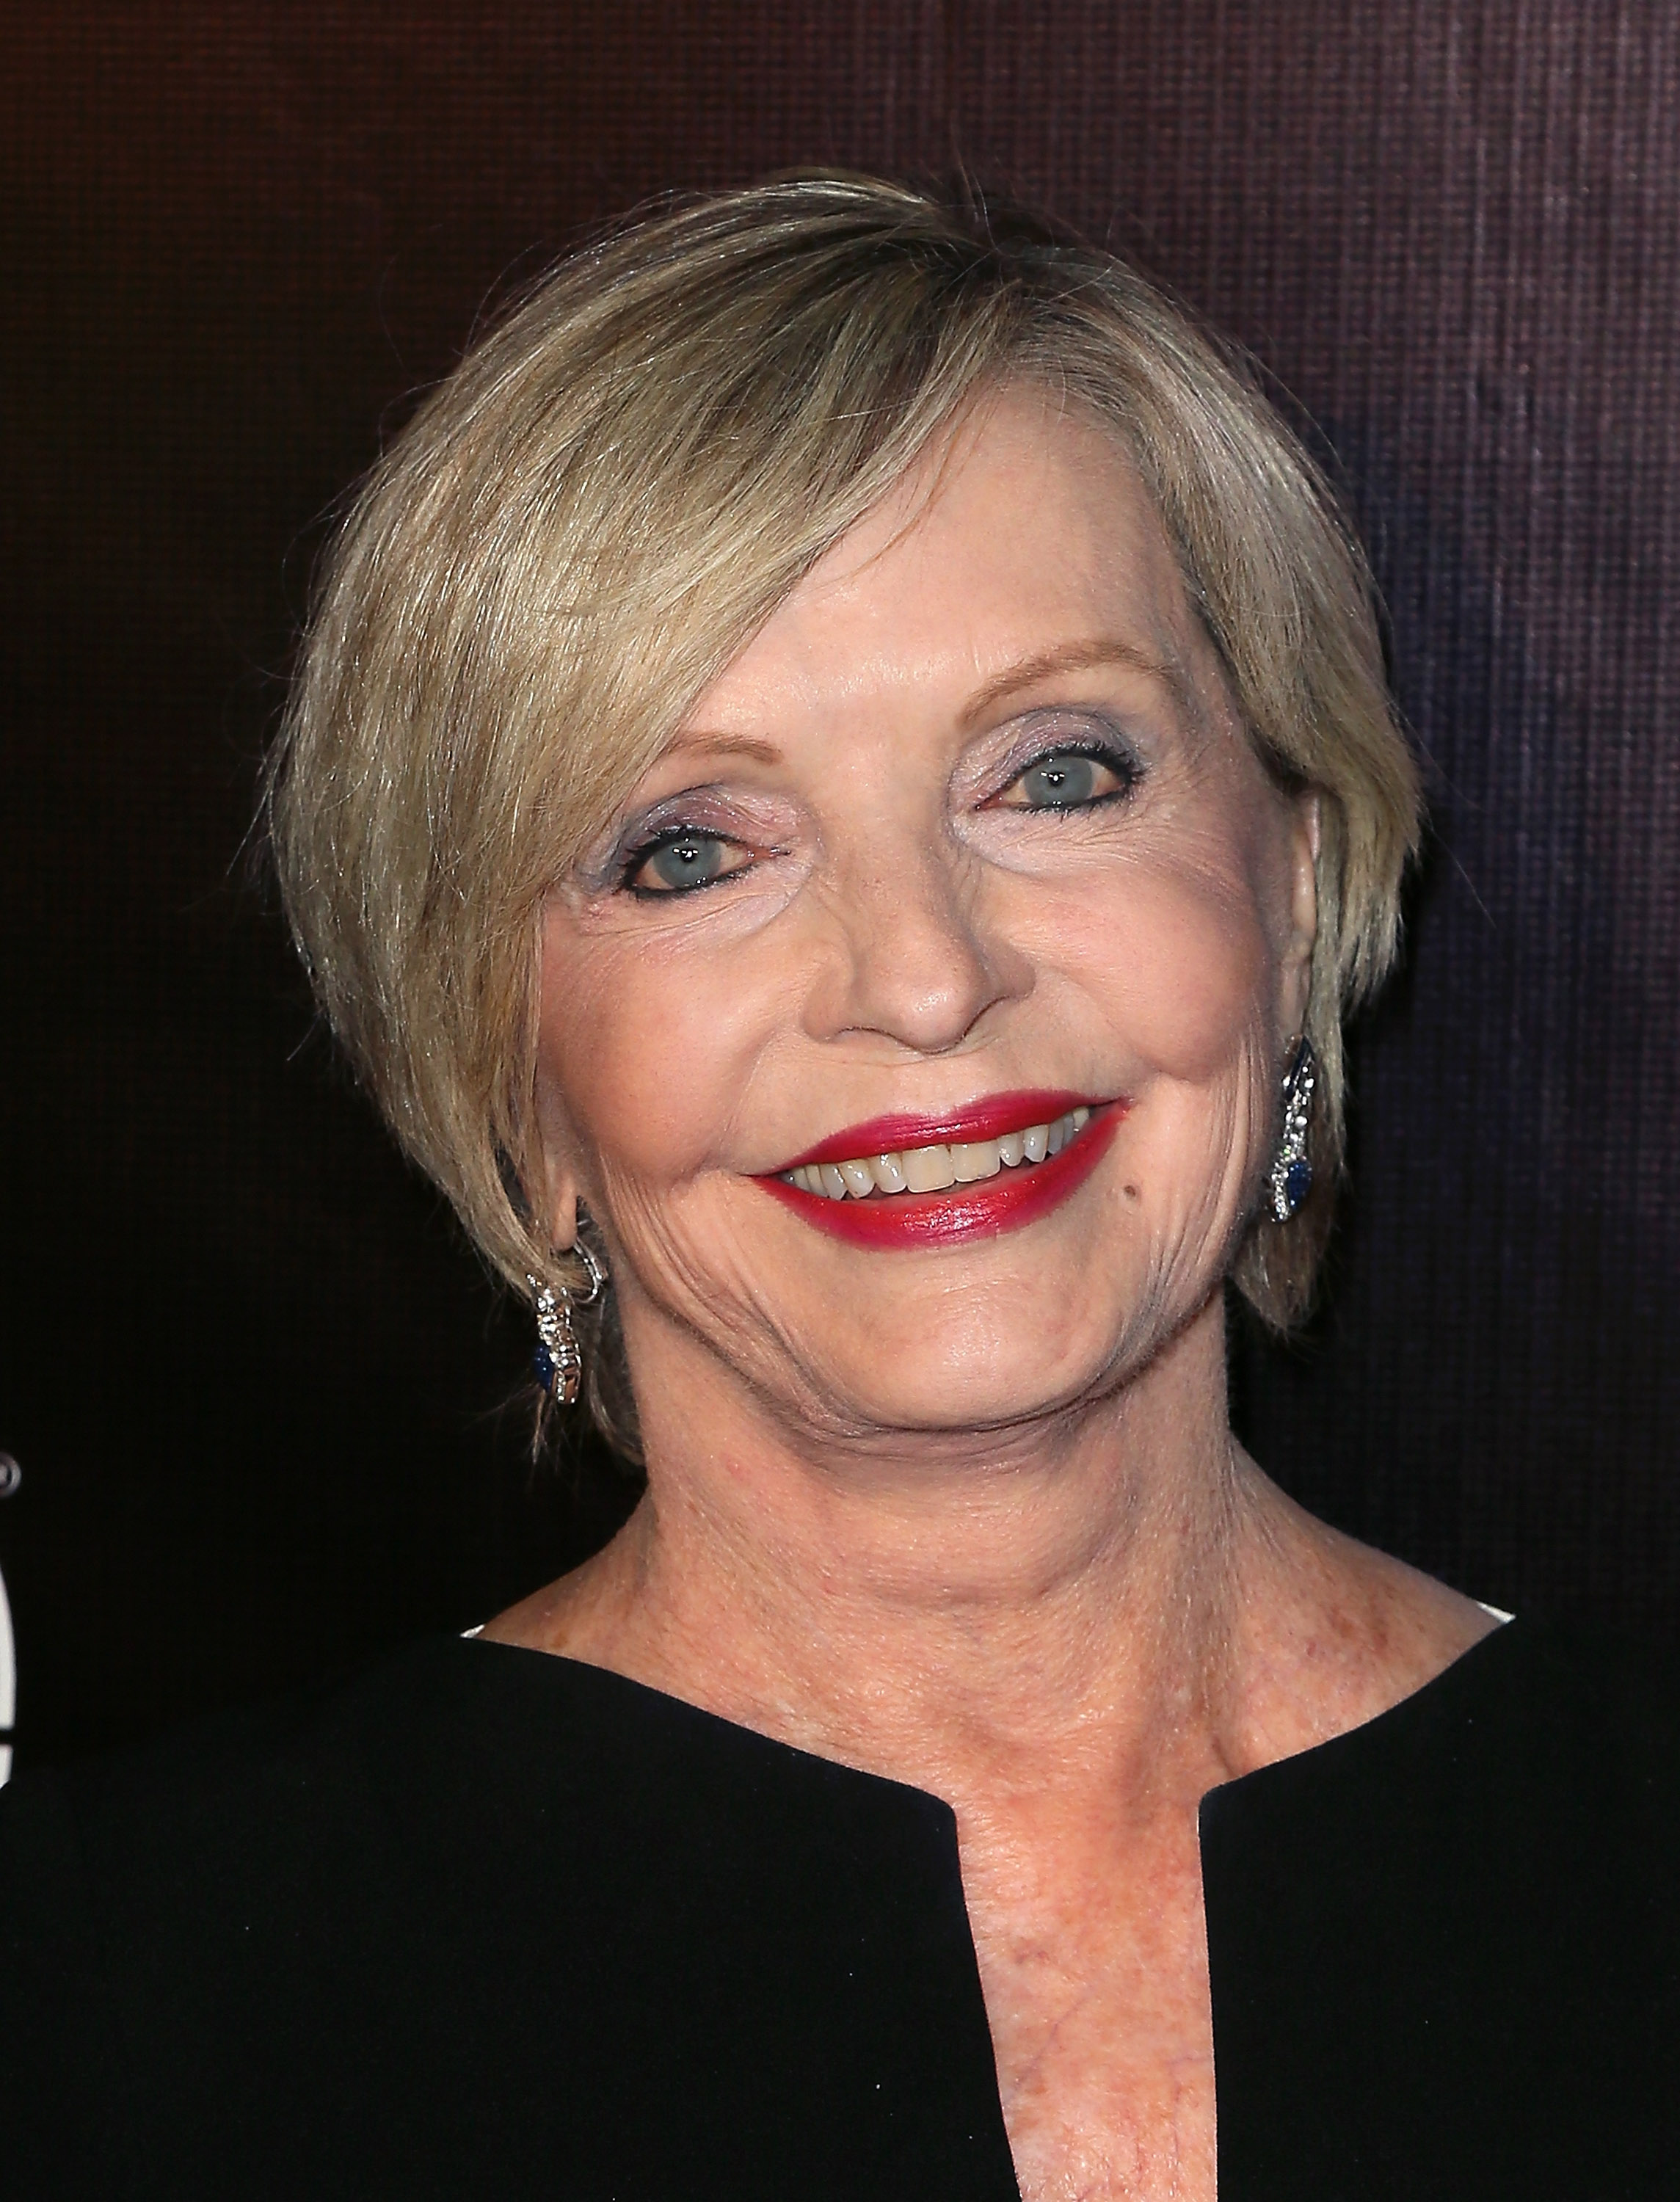 Actress Florence Henderson attends the 10th anniversary of ABC's "Dancing with the Stars" at Greystone Manor on April 21, 2015 in West Hollywood, Calif.